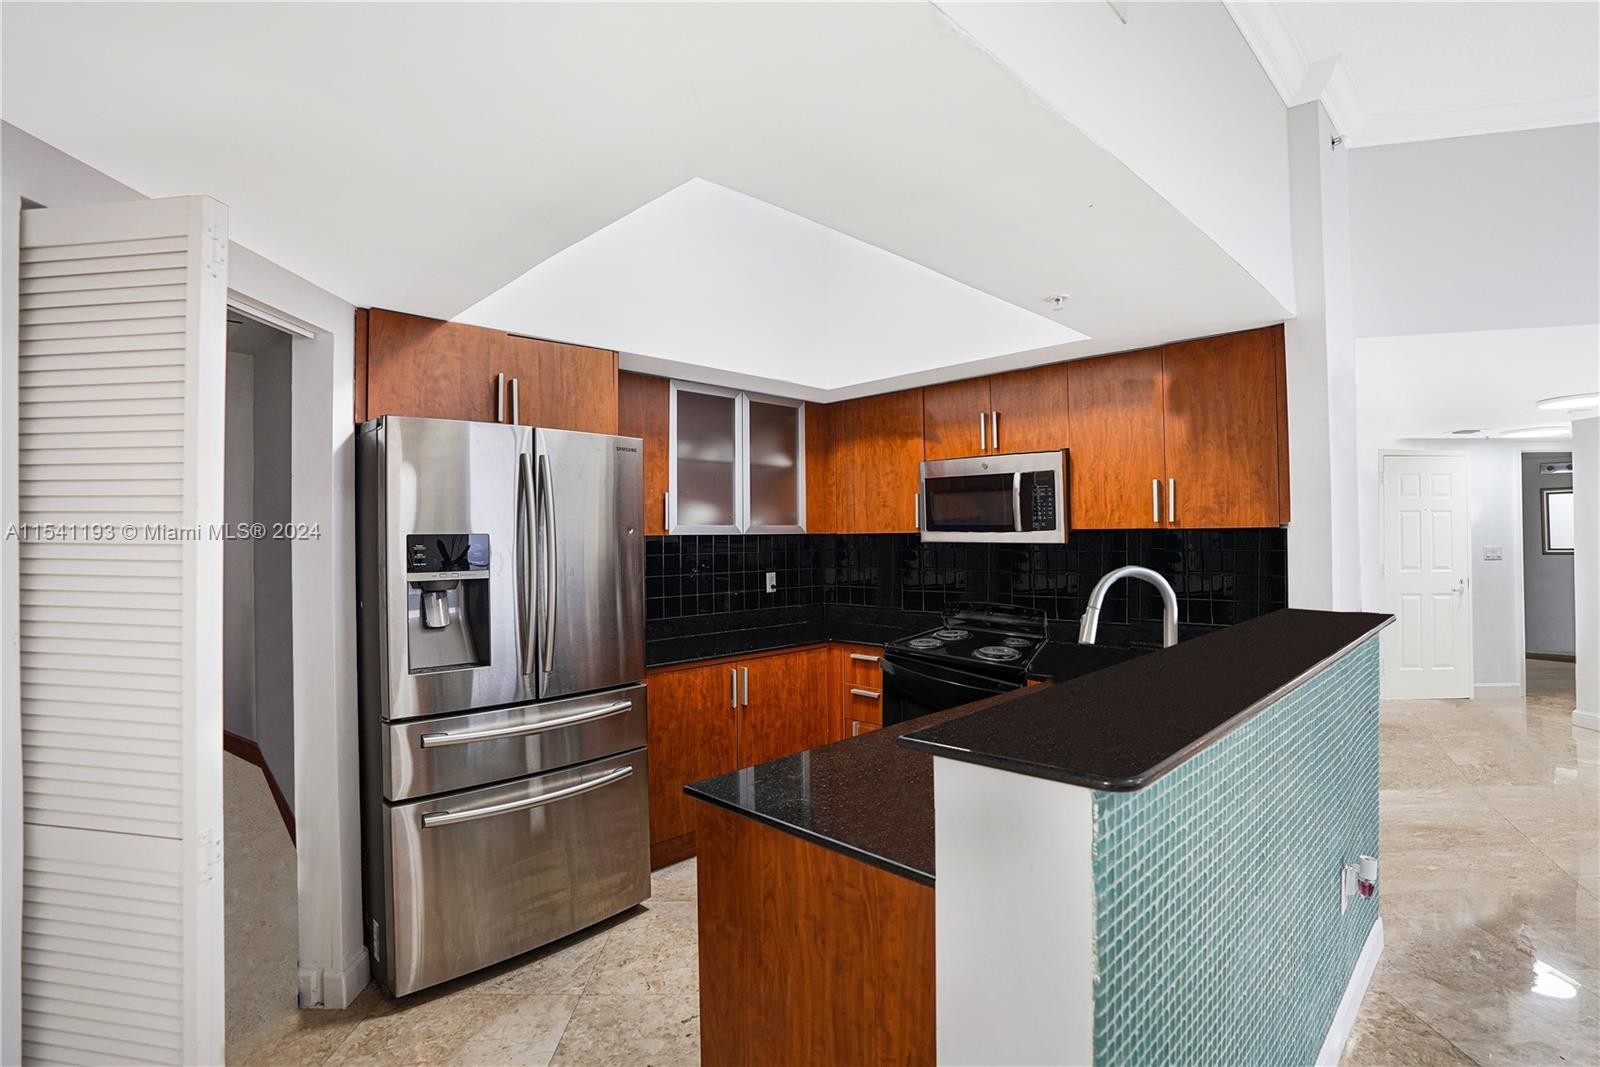 9. 16699 Collins Ave Avail June 3rd